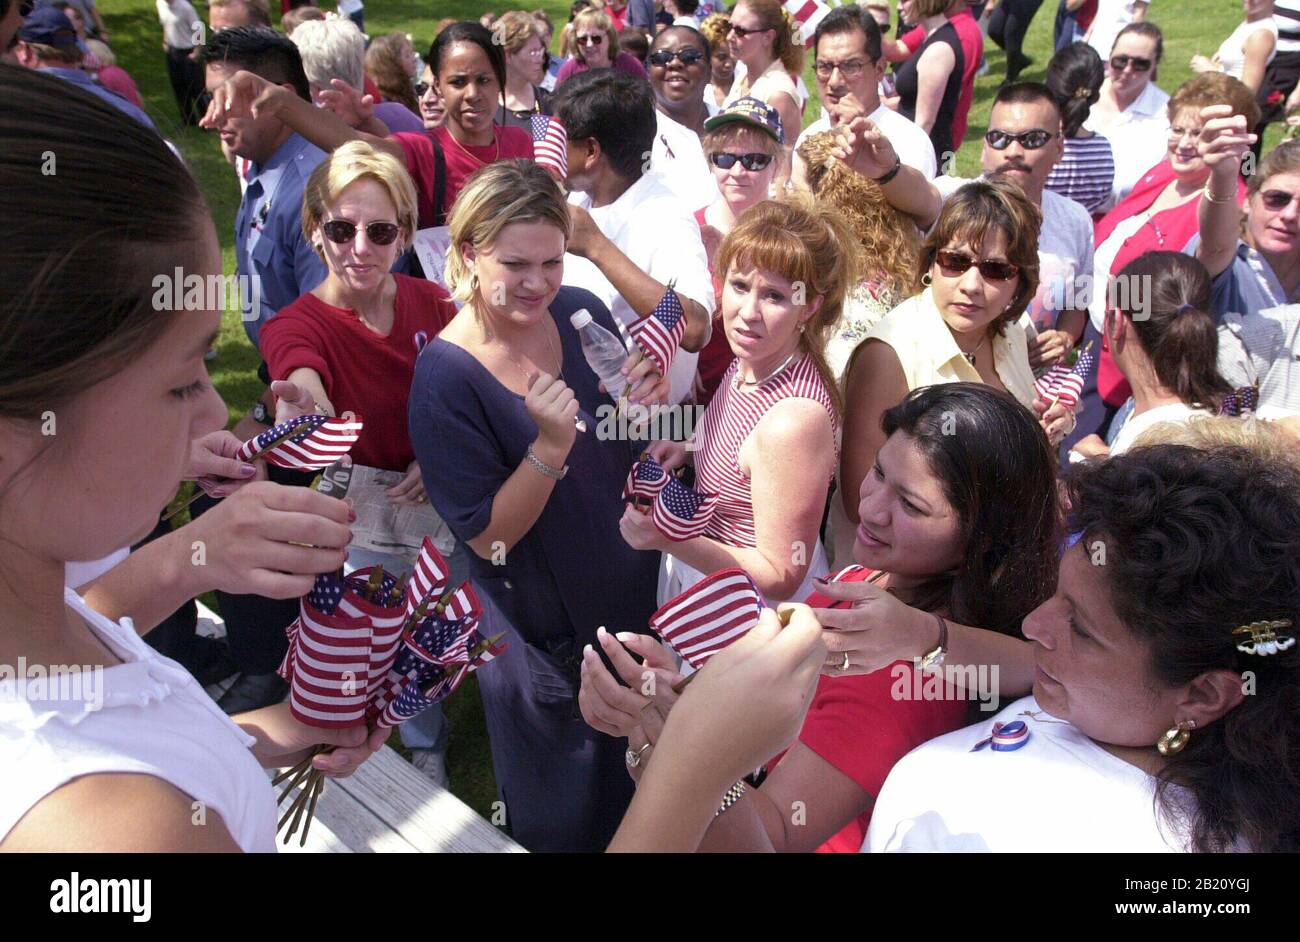 Sept. 14, 2001, Austin, Texas: A young girl hands out small American flags as people from throughout central Texas rally Friday at Woodridge Park to show their patriotism in light of this week's terrorist attacks in New York and Washington. Thousands showed up to sing patriotic songs and show American unity. ©Bob Daemmrich Stock Photo